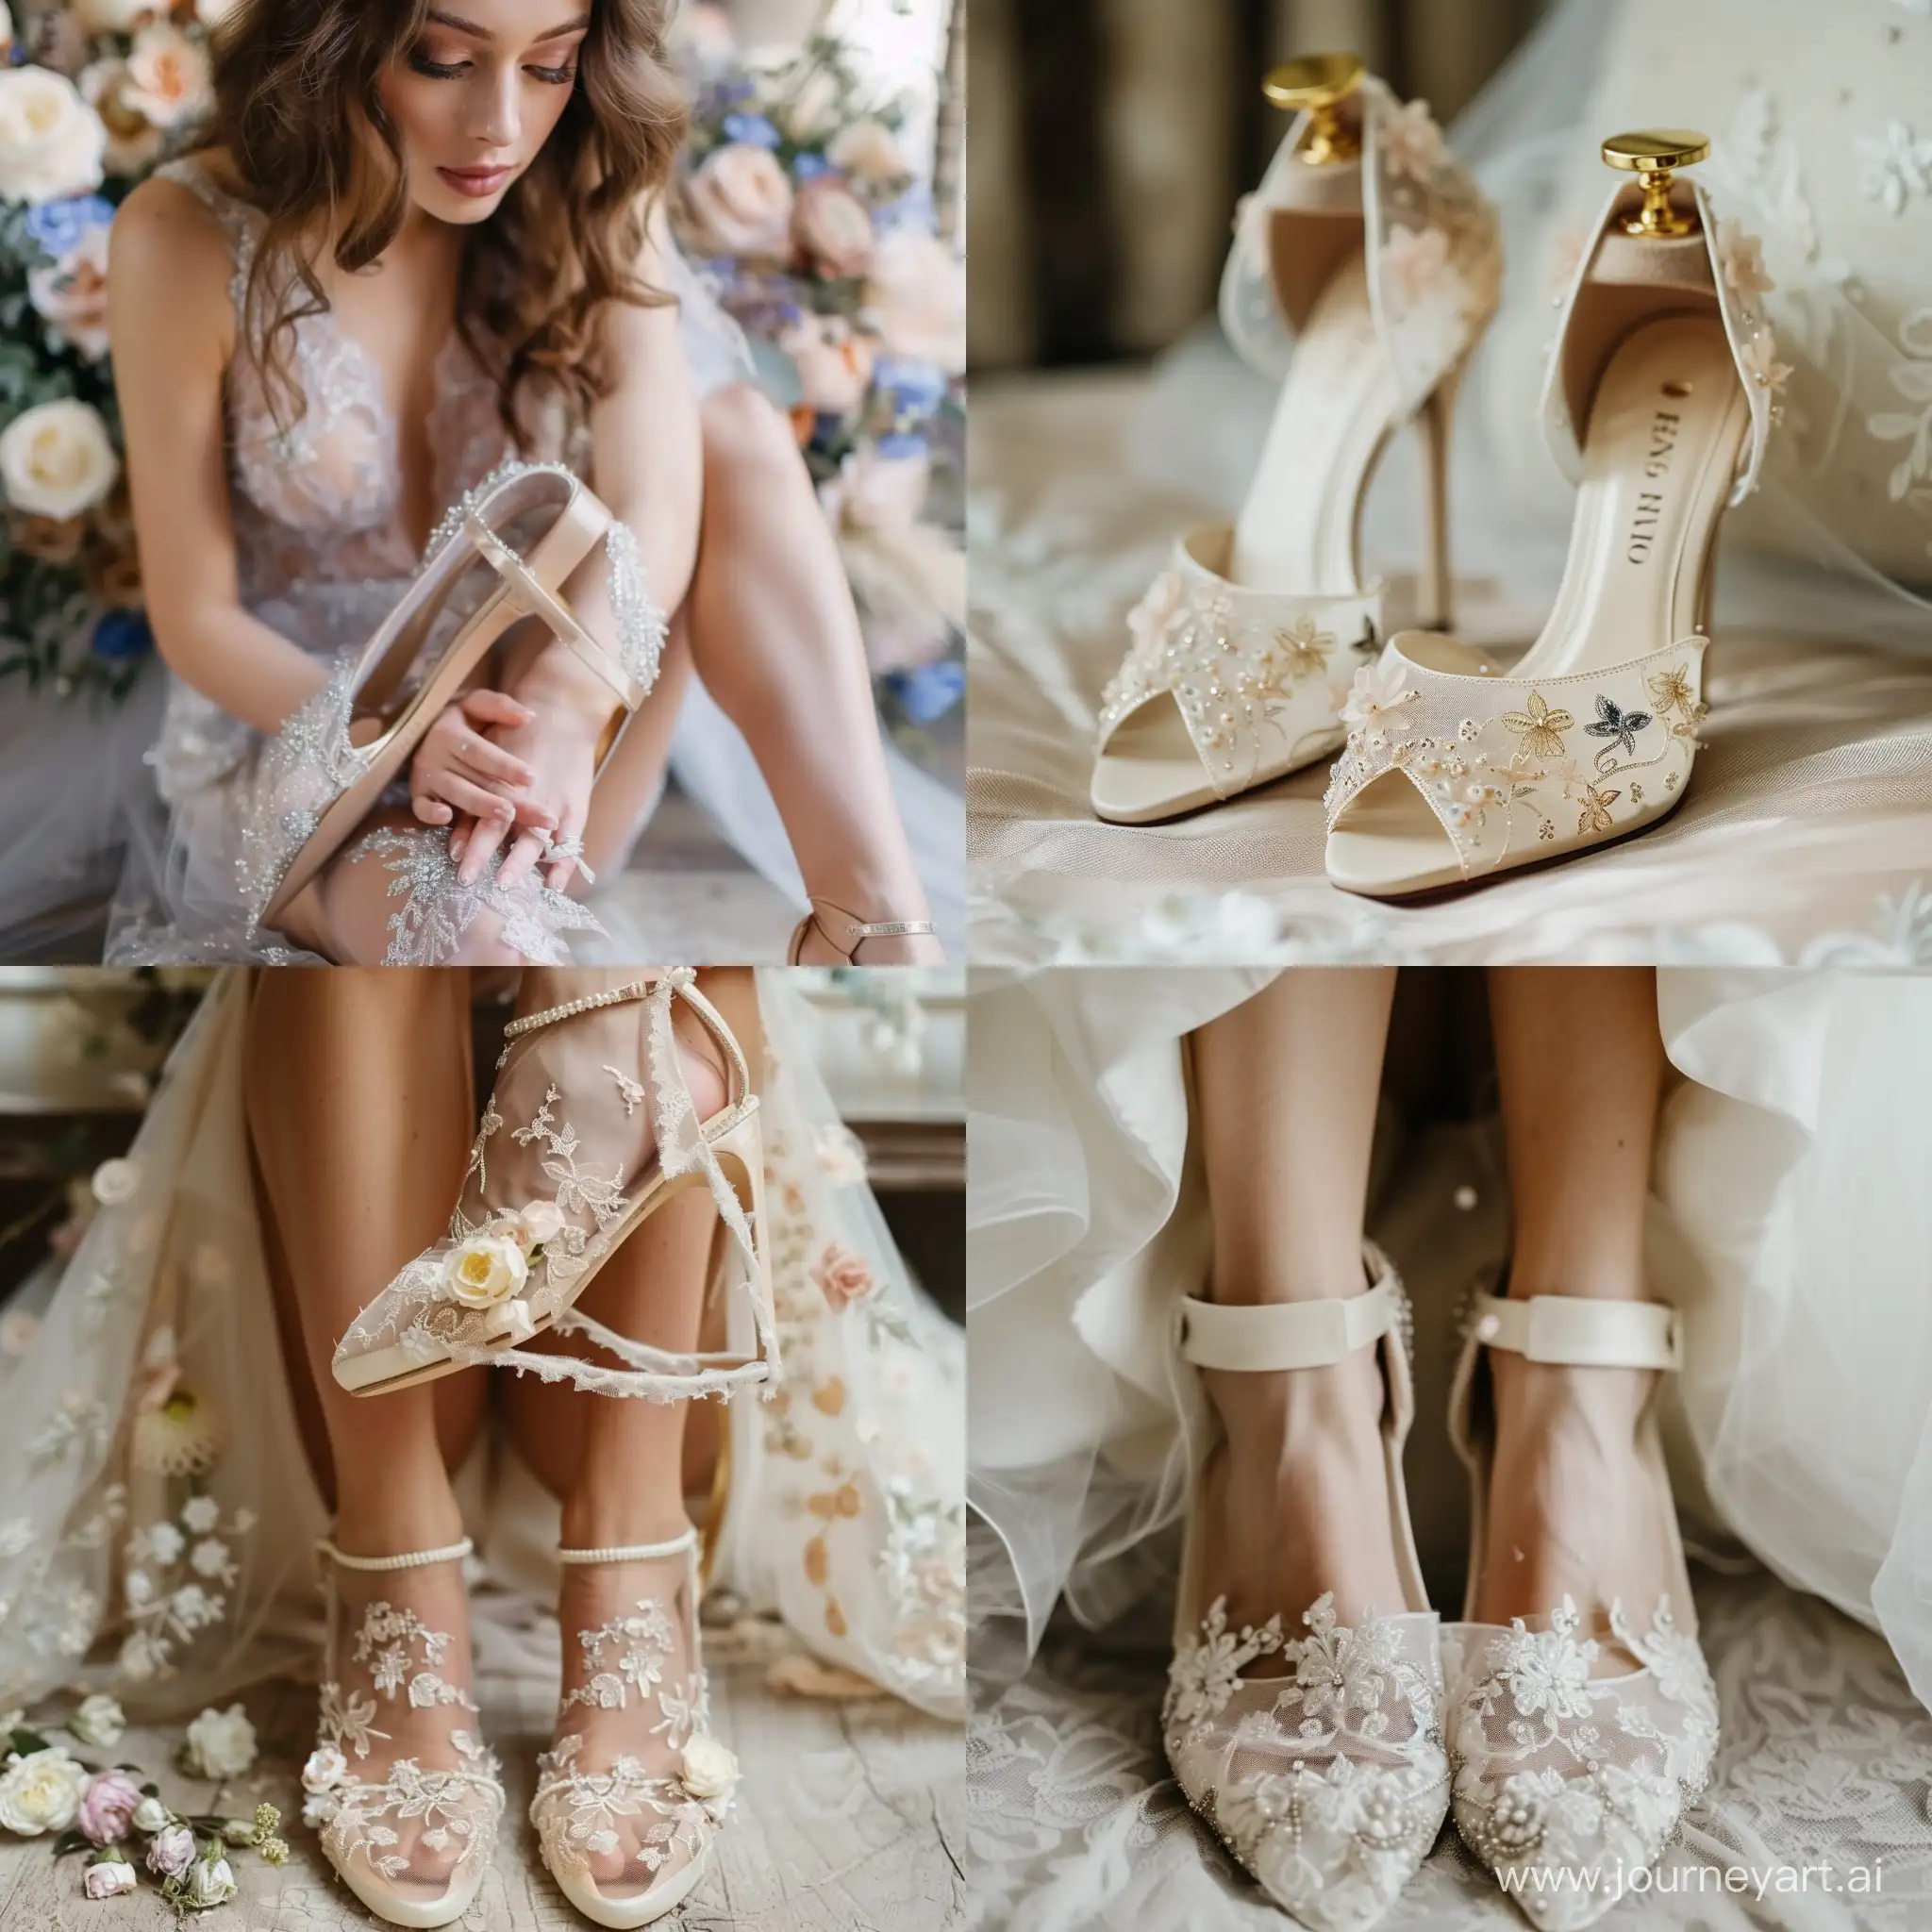 Ethereal-Bridal-Shoes-in-a-Whimsical-Setting